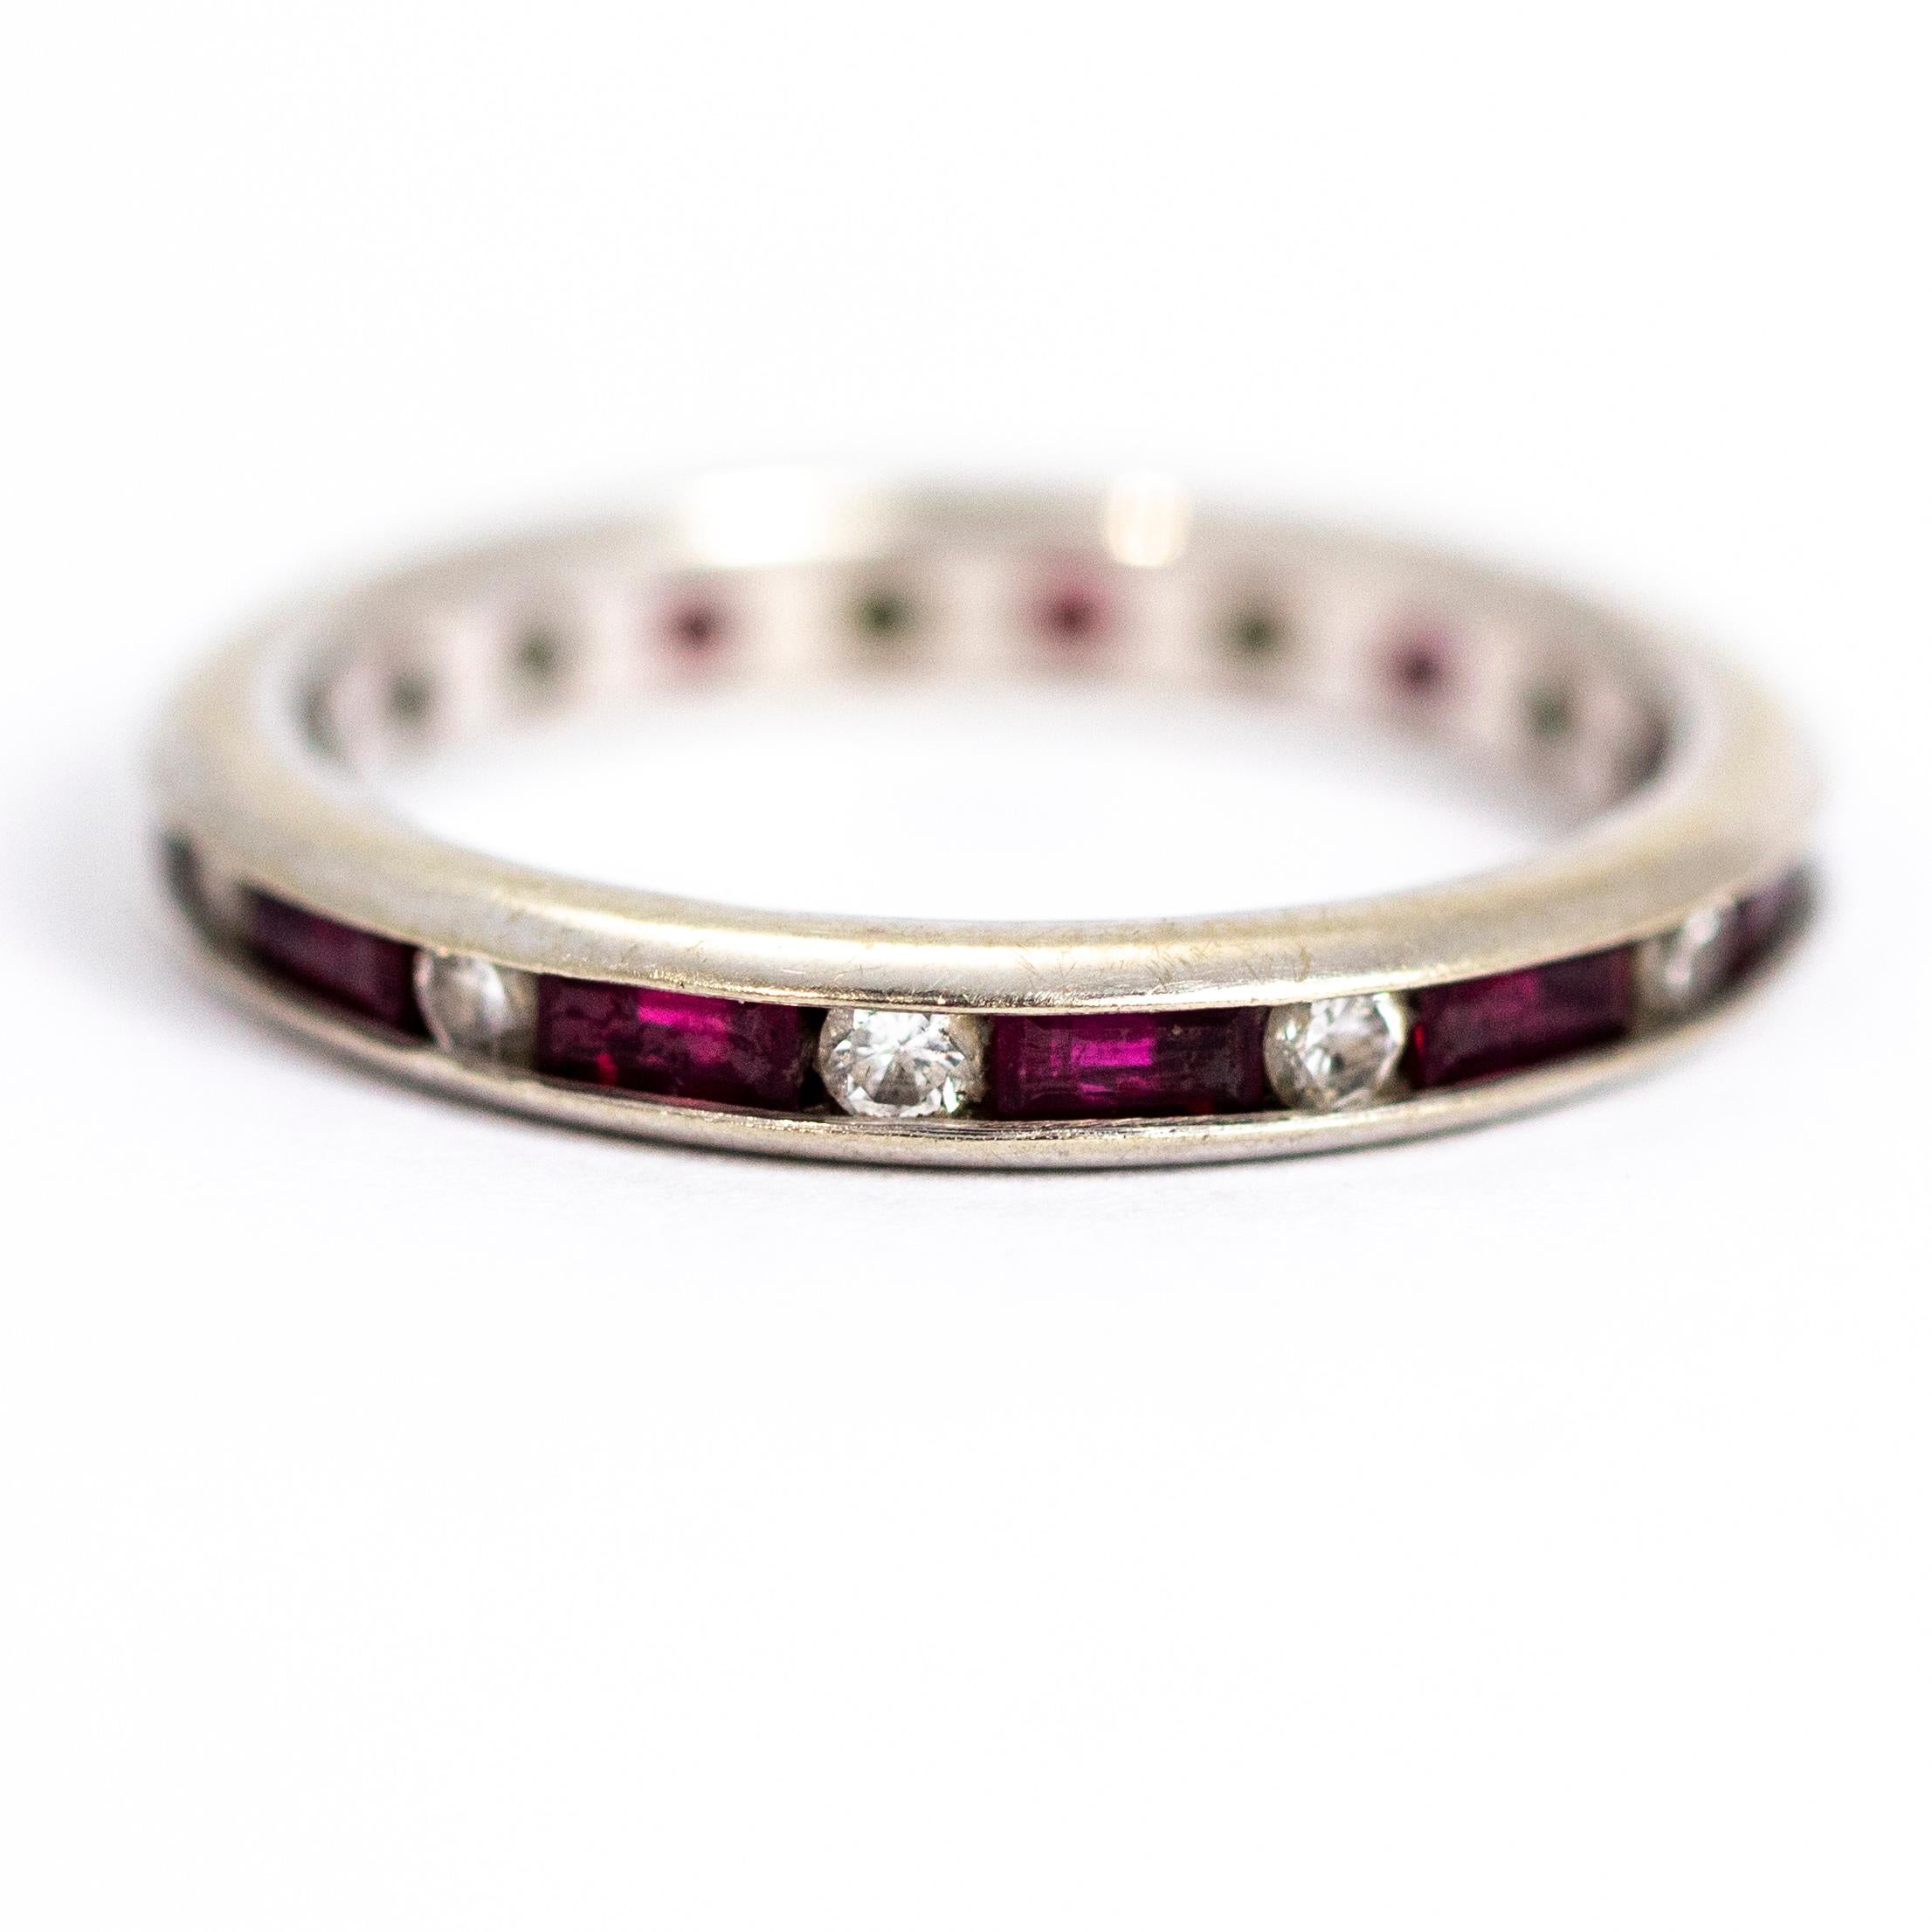 This stunning eternity band boasts sparkles all round with baguette rubies and diamonds. Modelled out of 14ct white gold and made in England.

Ring Size: O or 7 1/4